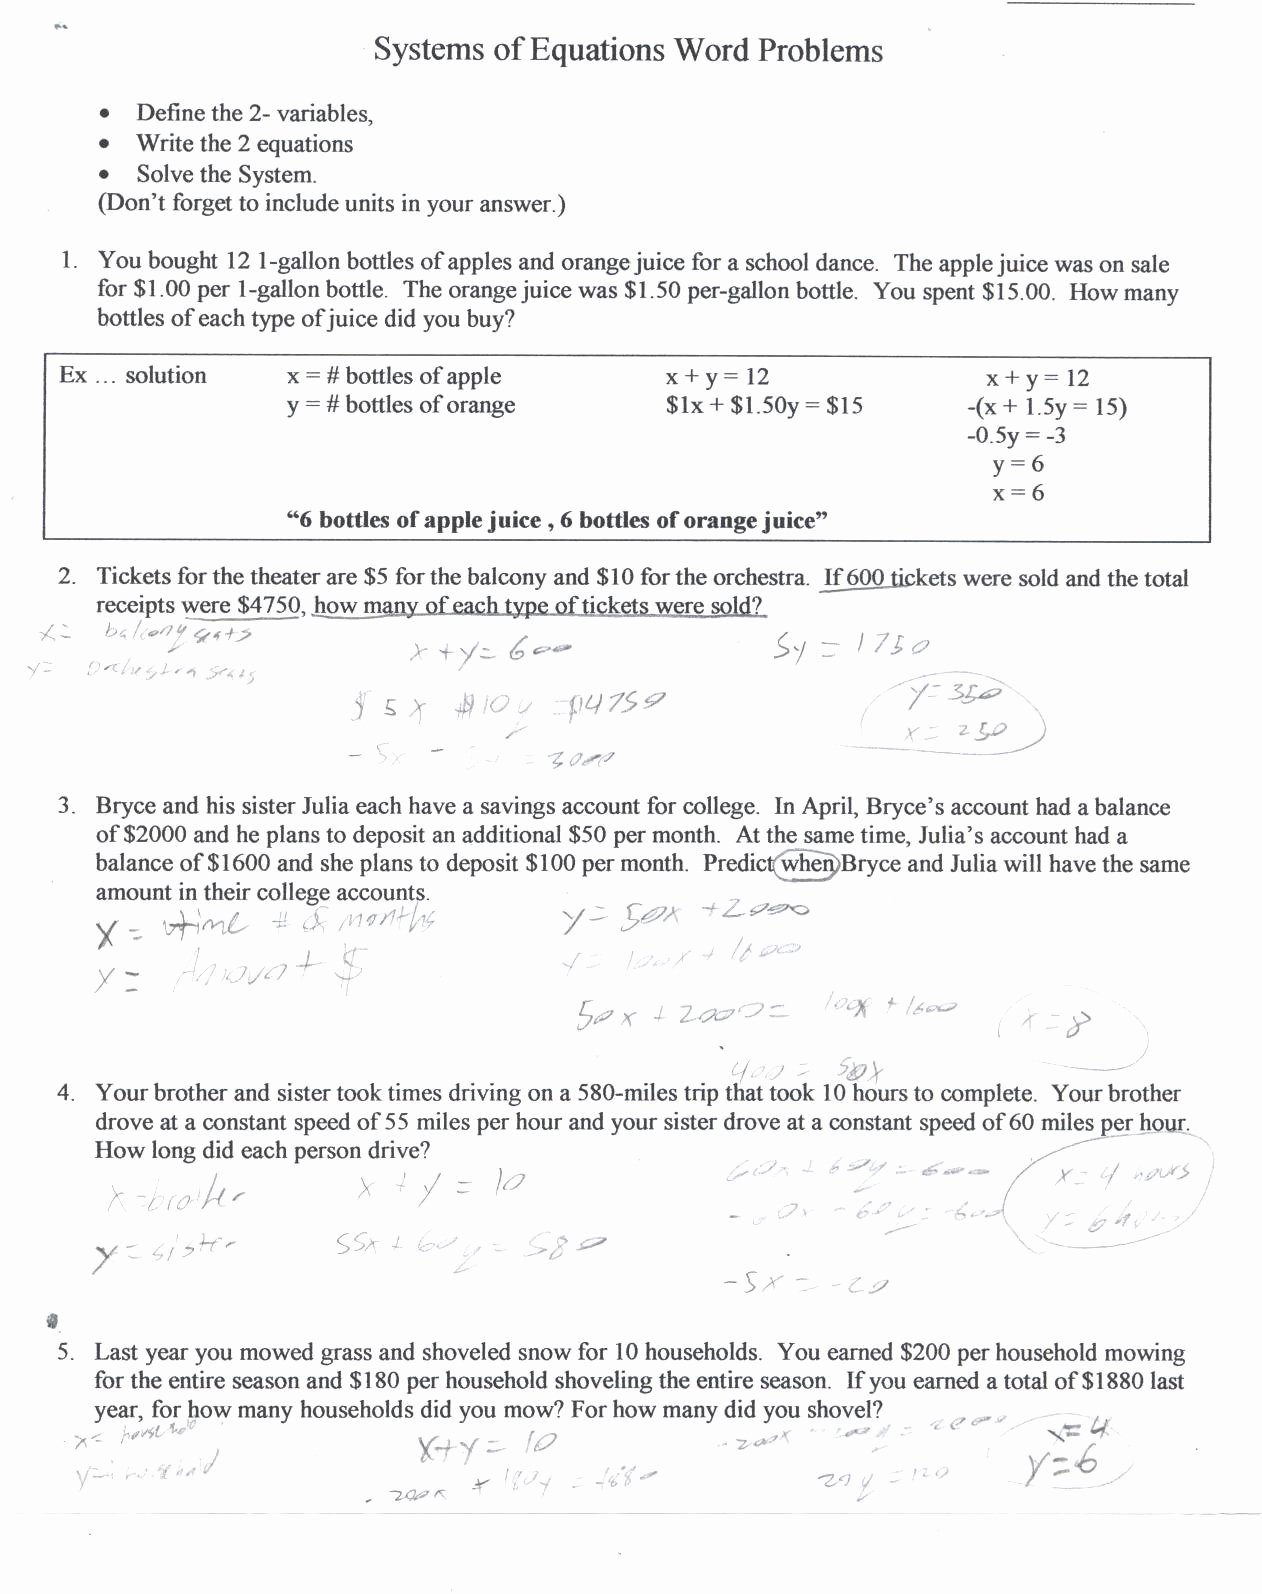 Linear Equations Word Problems Worksheet Luxury Algebra 1 Worksheet Linear Equation Word Problems Answers